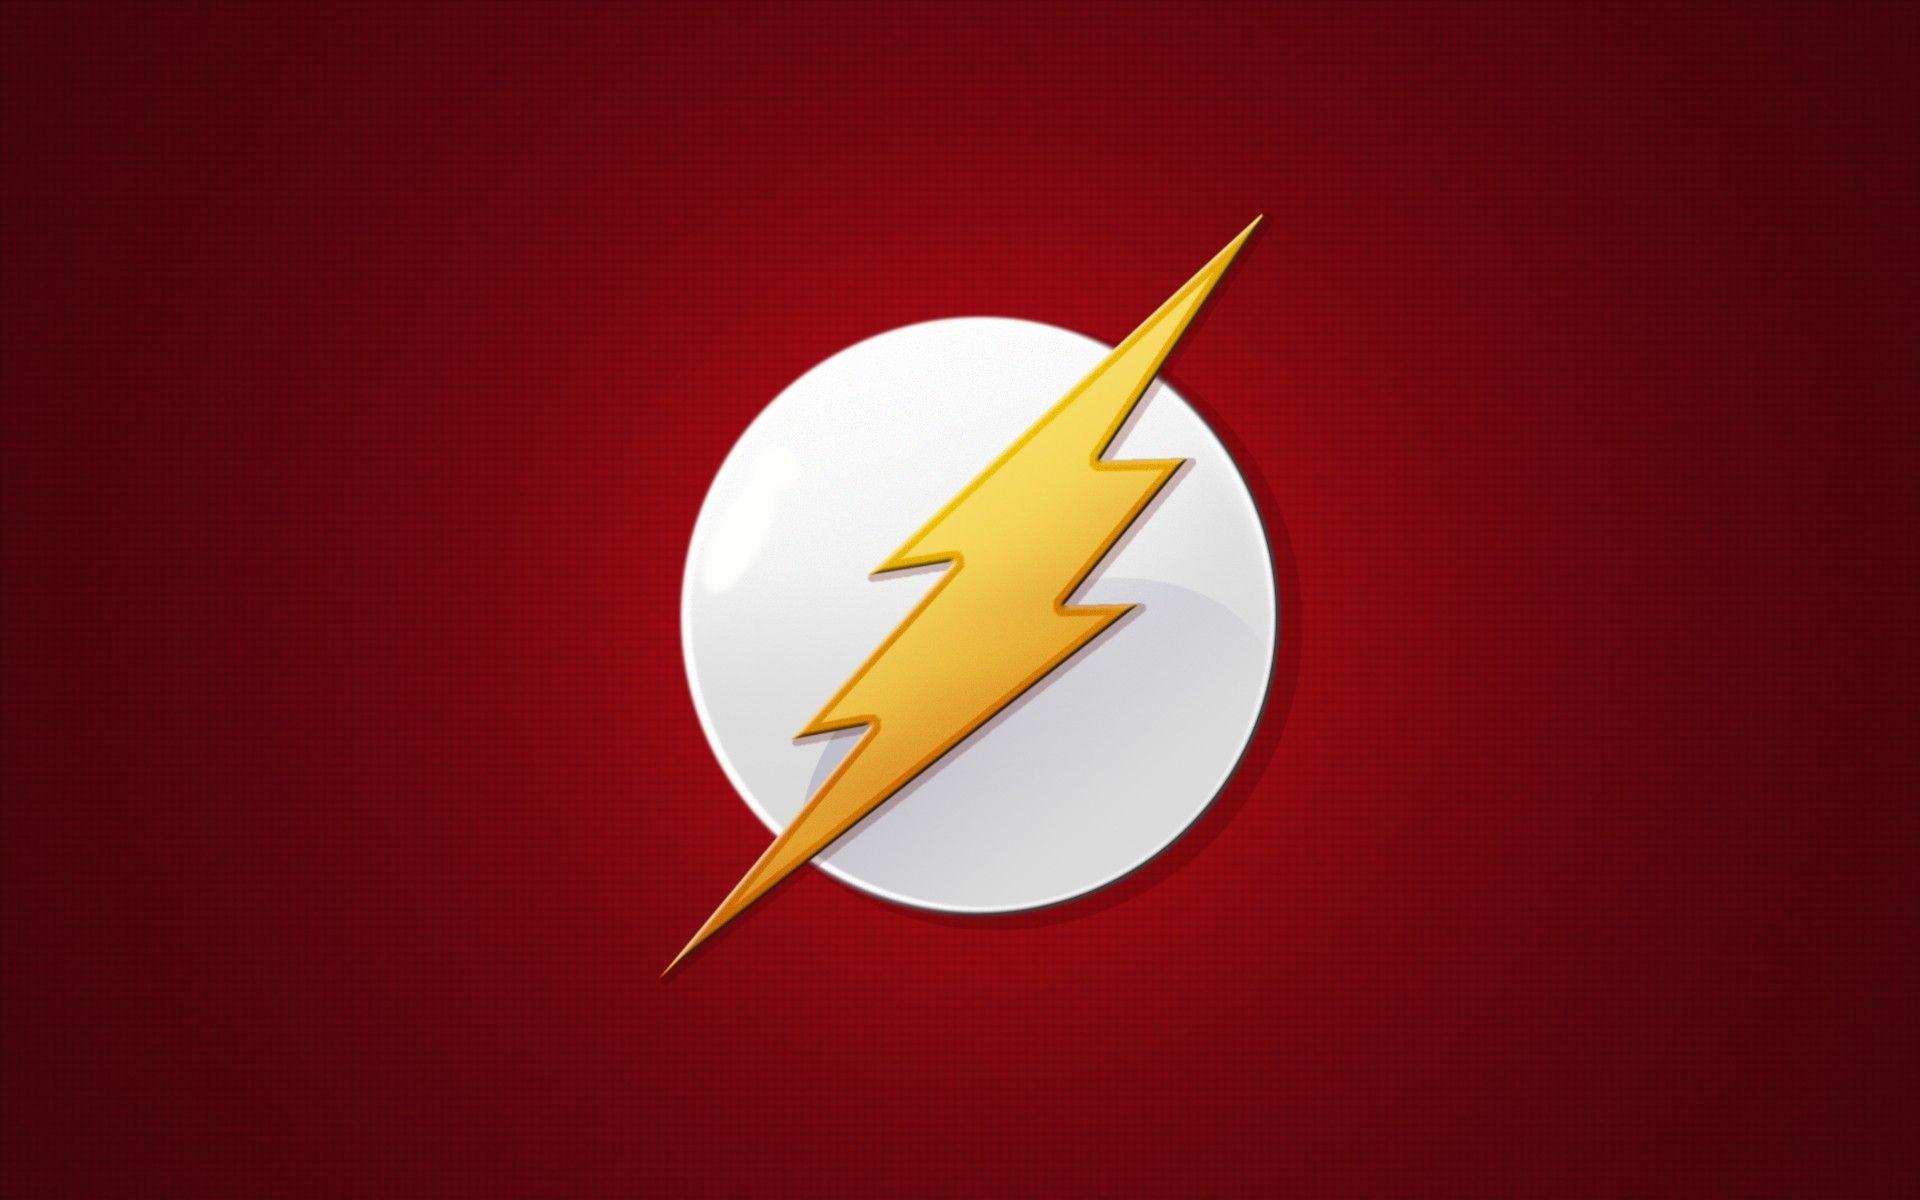 The Flash Logo 4k Wallpapers Top Free The Flash Logo 4k Backgrounds Wallpaperaccess - simbolo do flash roblox